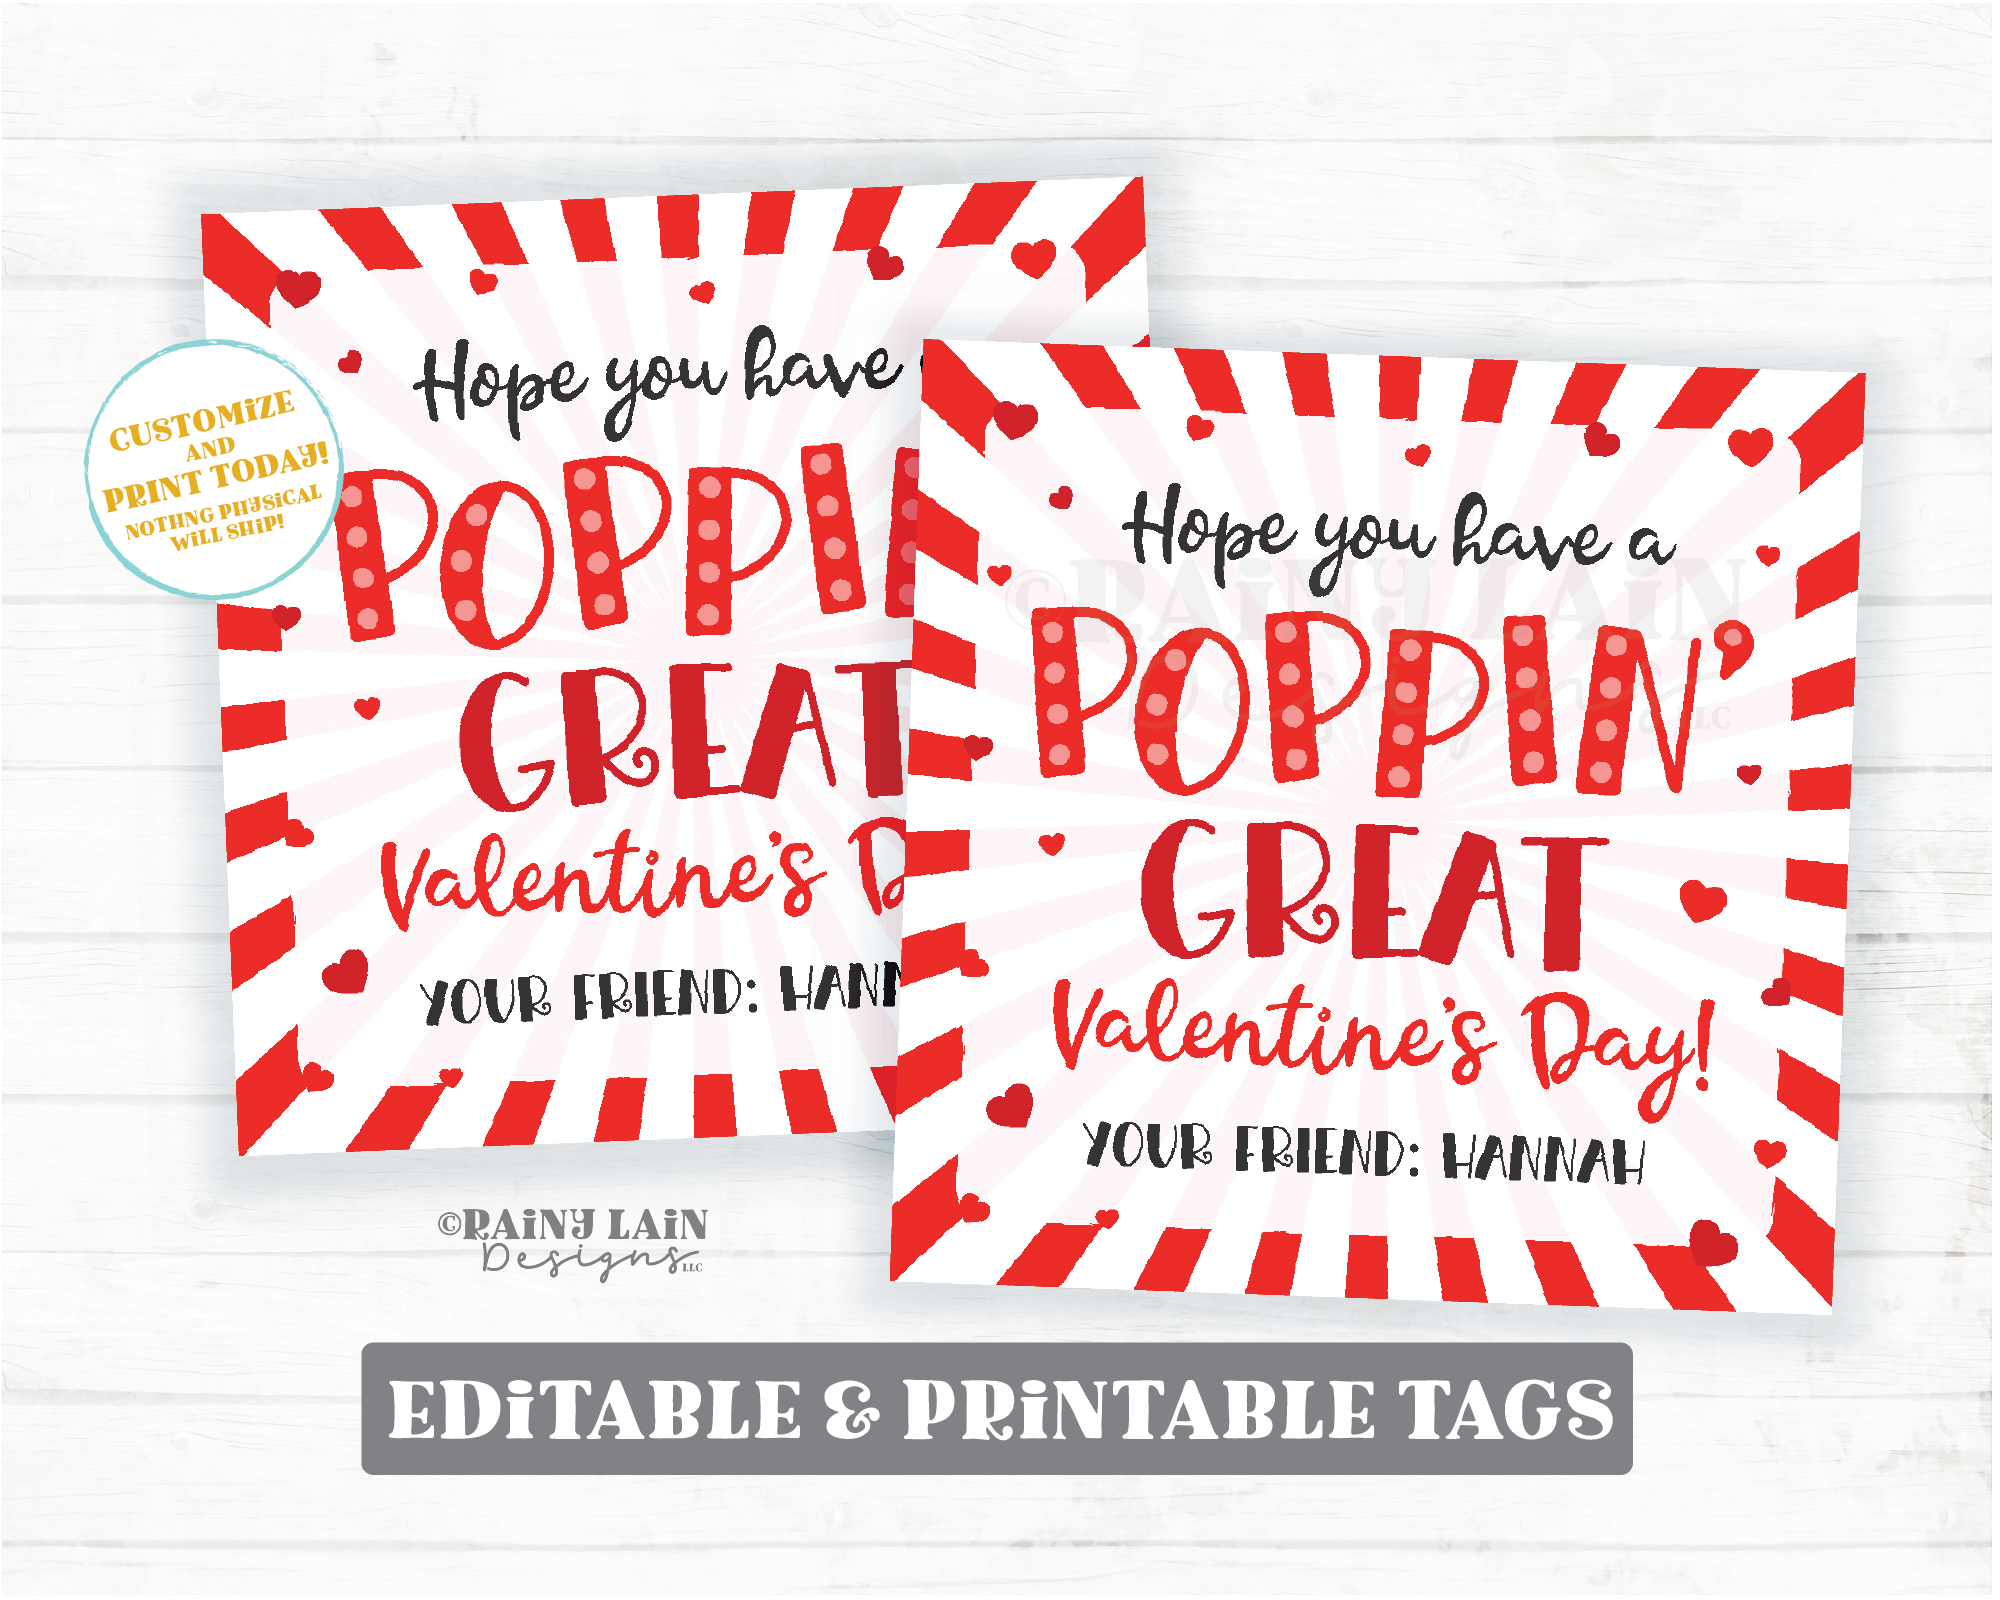 Poppin Great Valentines Day Pop Bracelet Gift Tag Popping Good Fidget Toy Valentine From Teacher Classroom Preschool Popcorn Non-Candy Favor